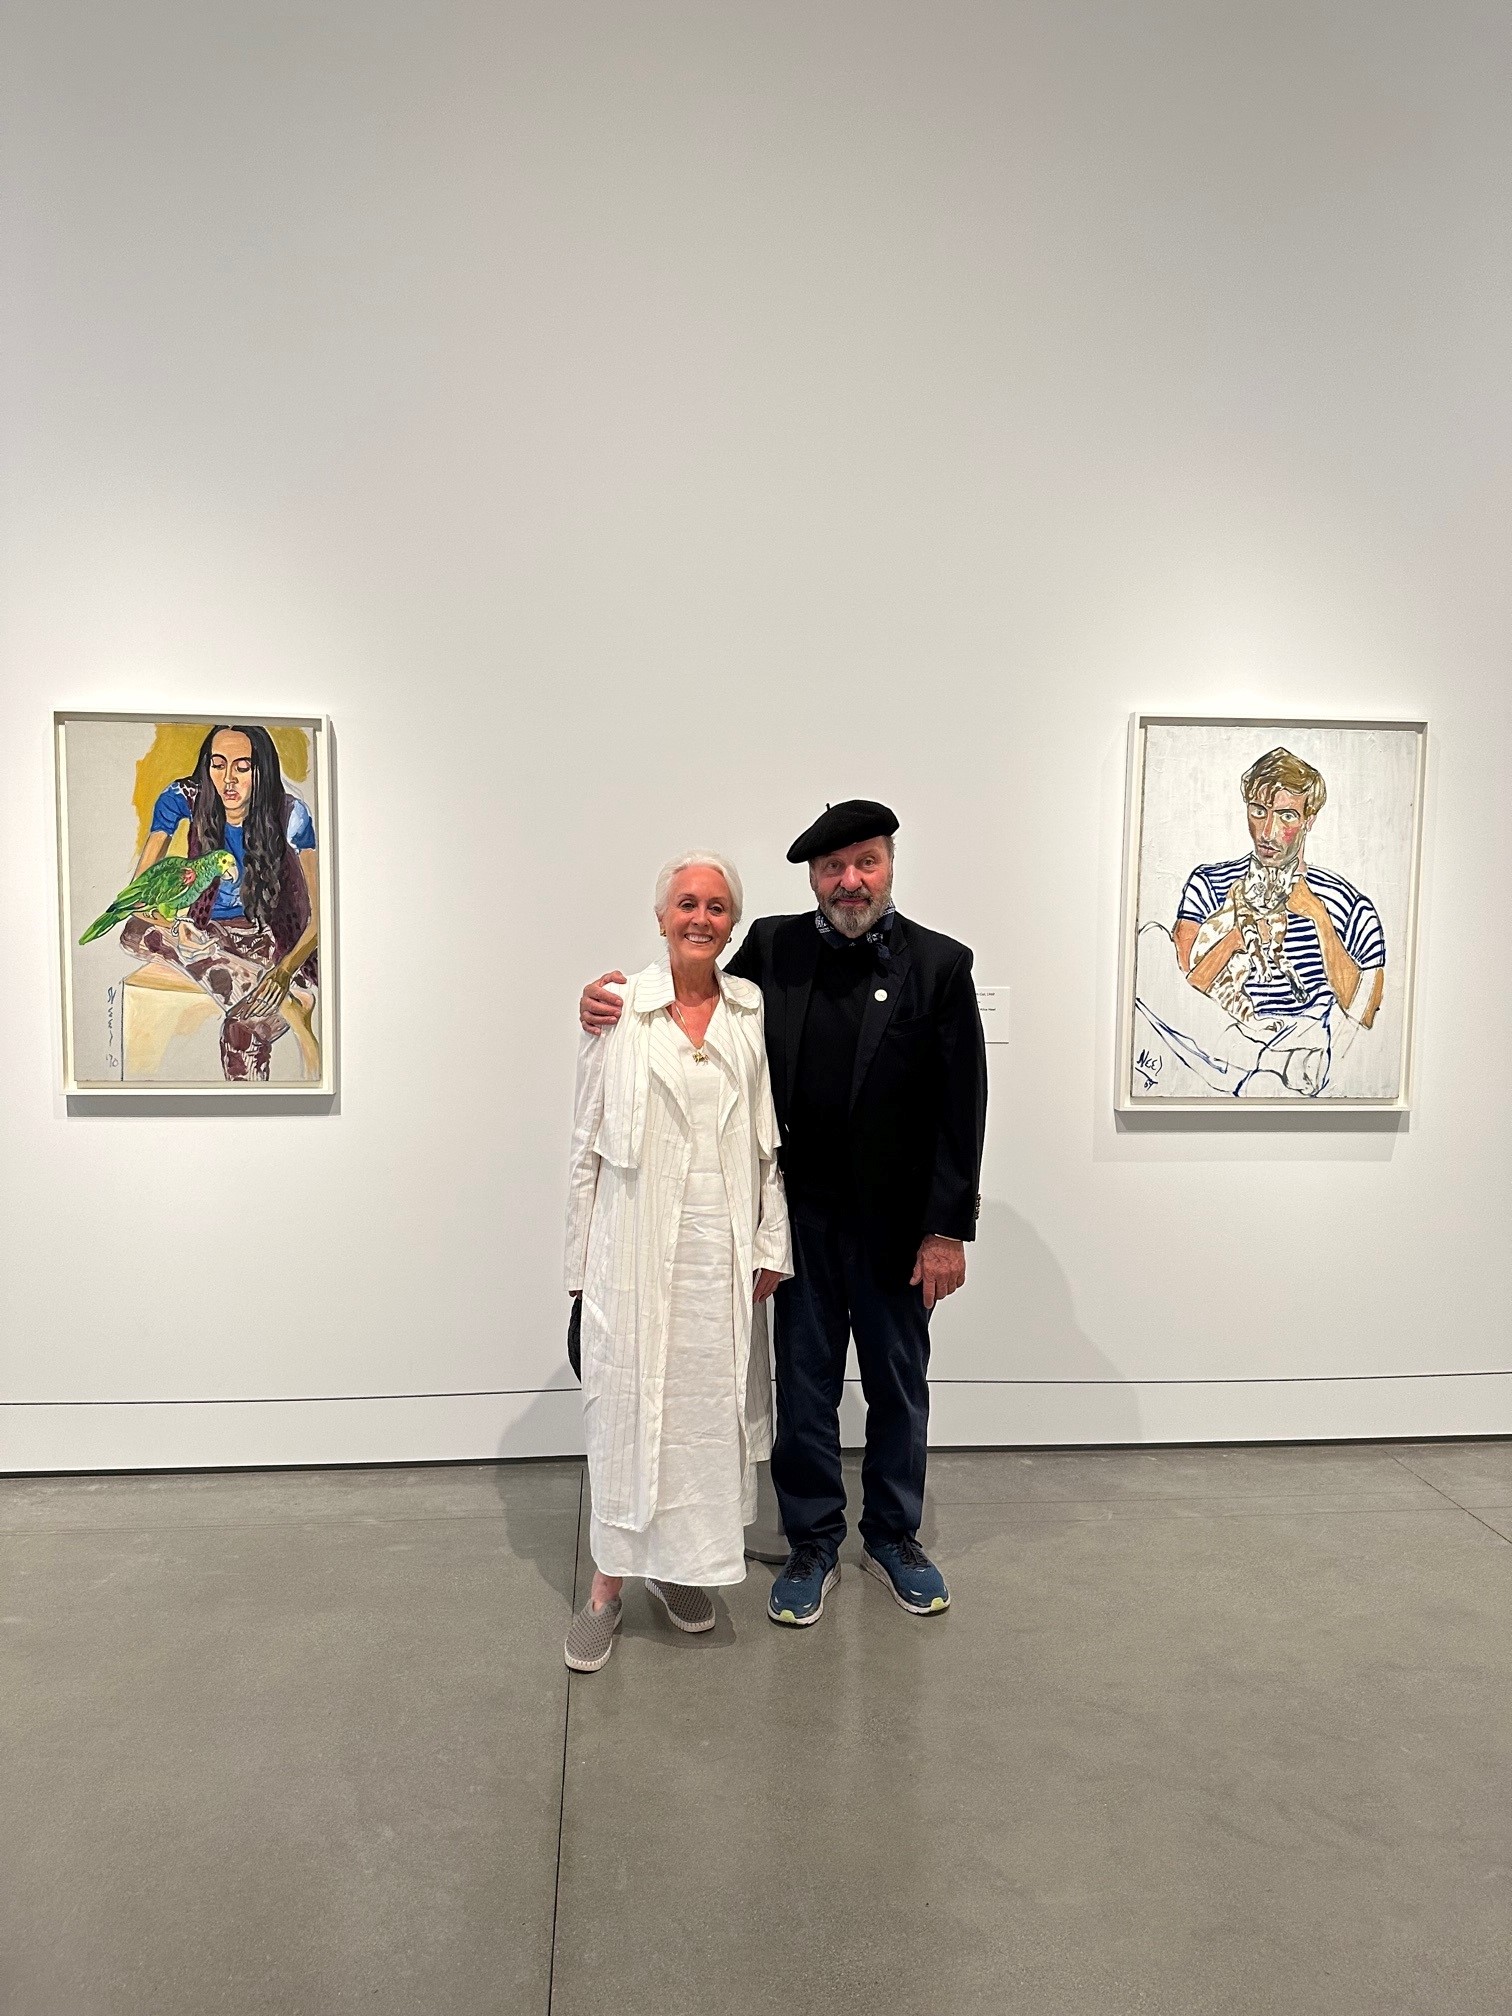 Hartley and Ginny Neel in front of paintings by Hartley's Mom Alice Neel